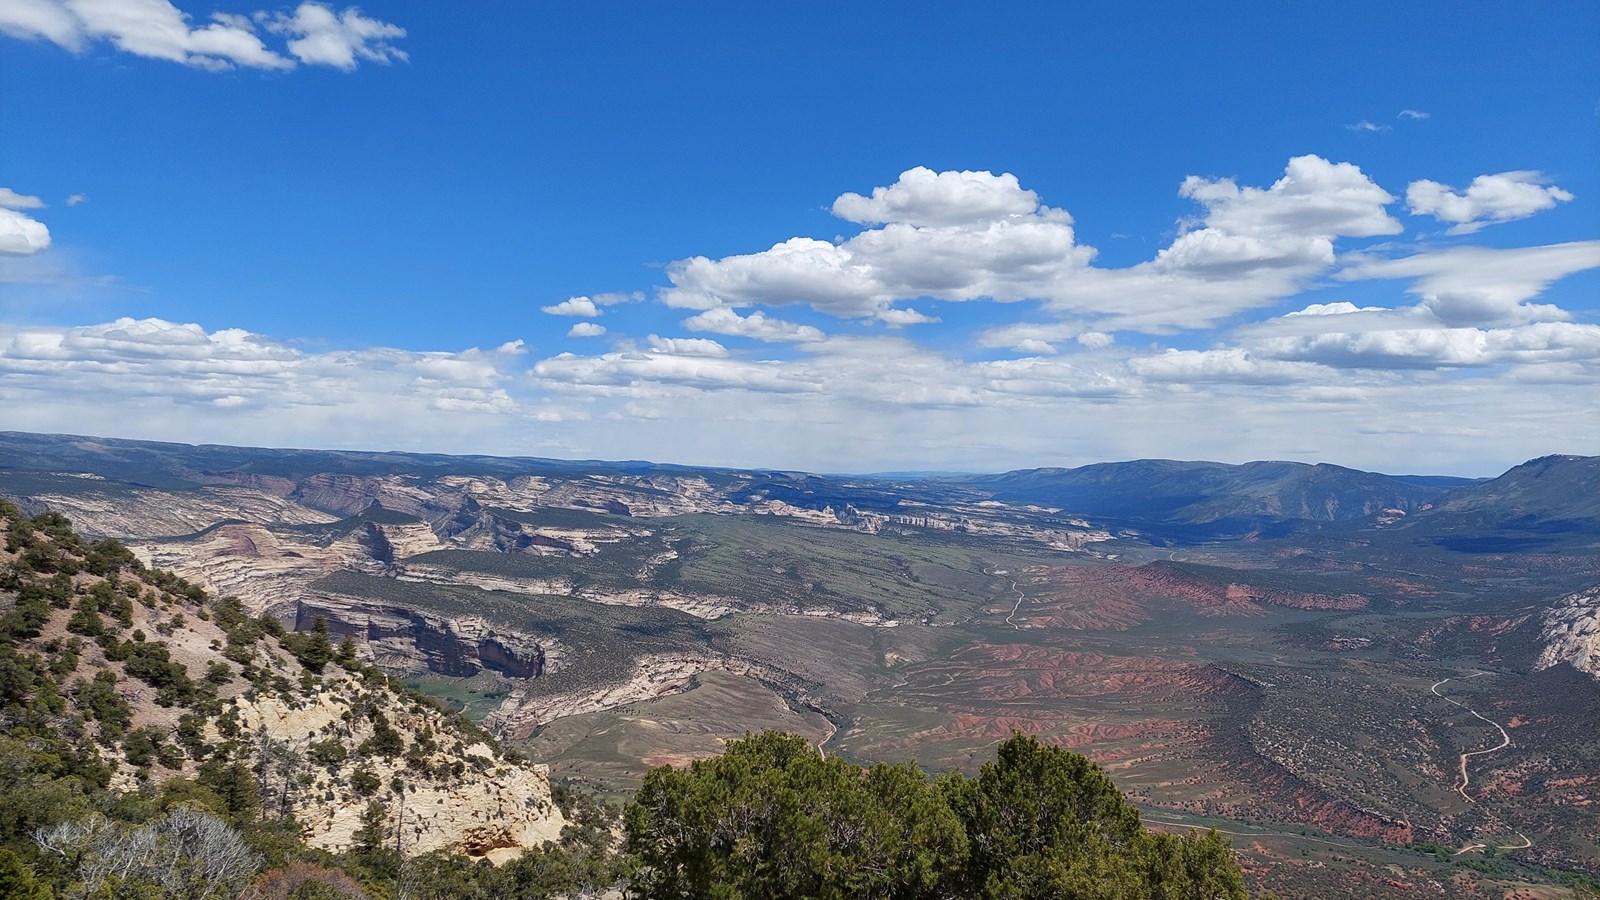 A forested overlook covered in pines and junipers, viewing vast canyons and plateaus. 